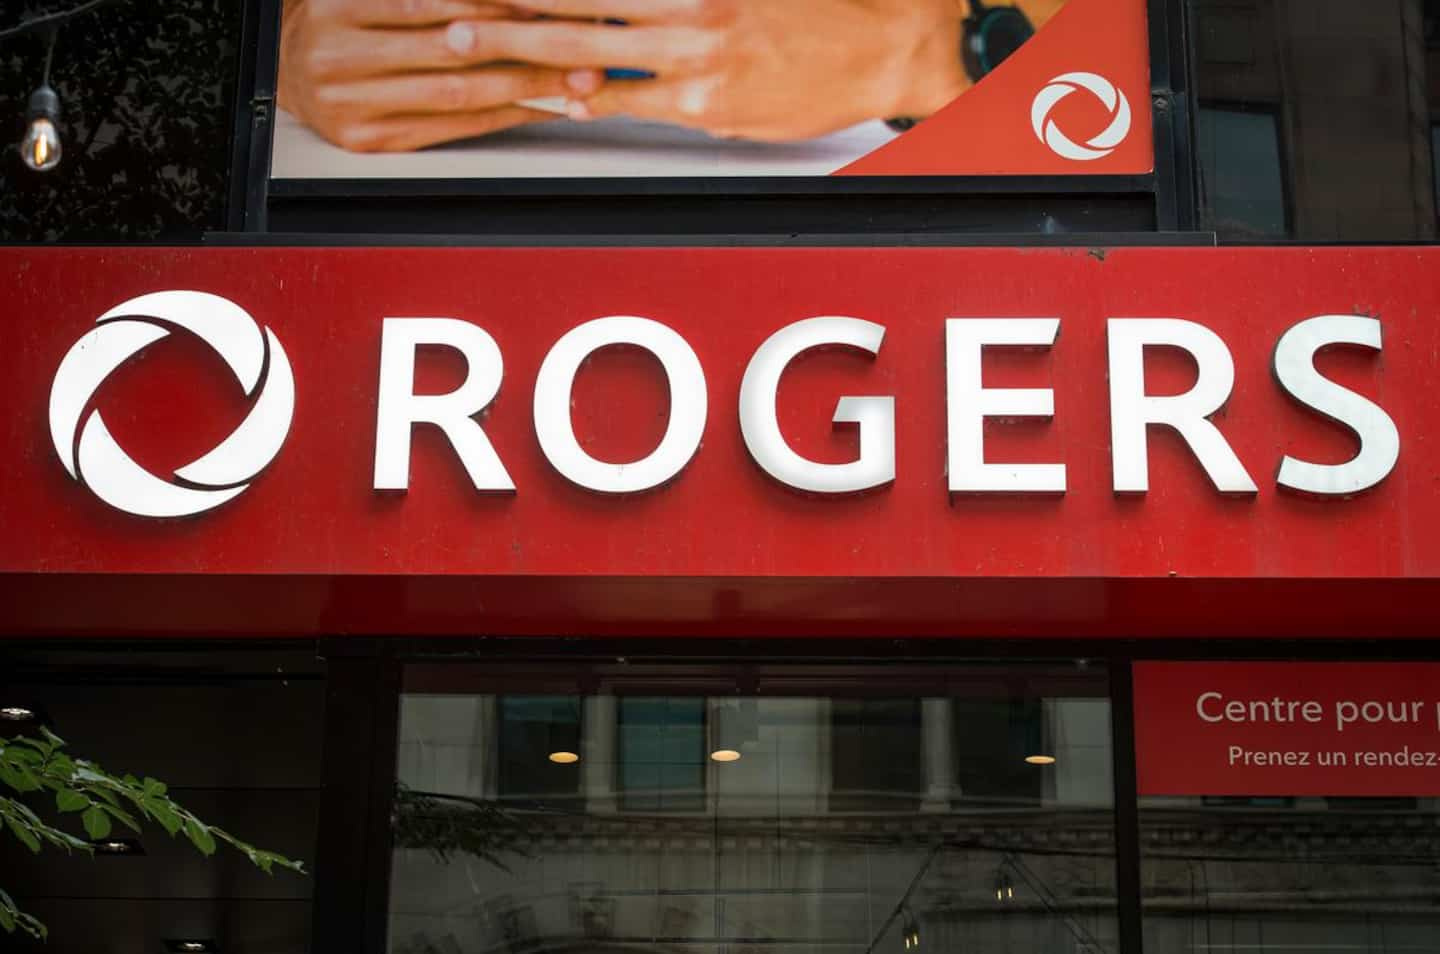 A first class action lawsuit filed against Rogers